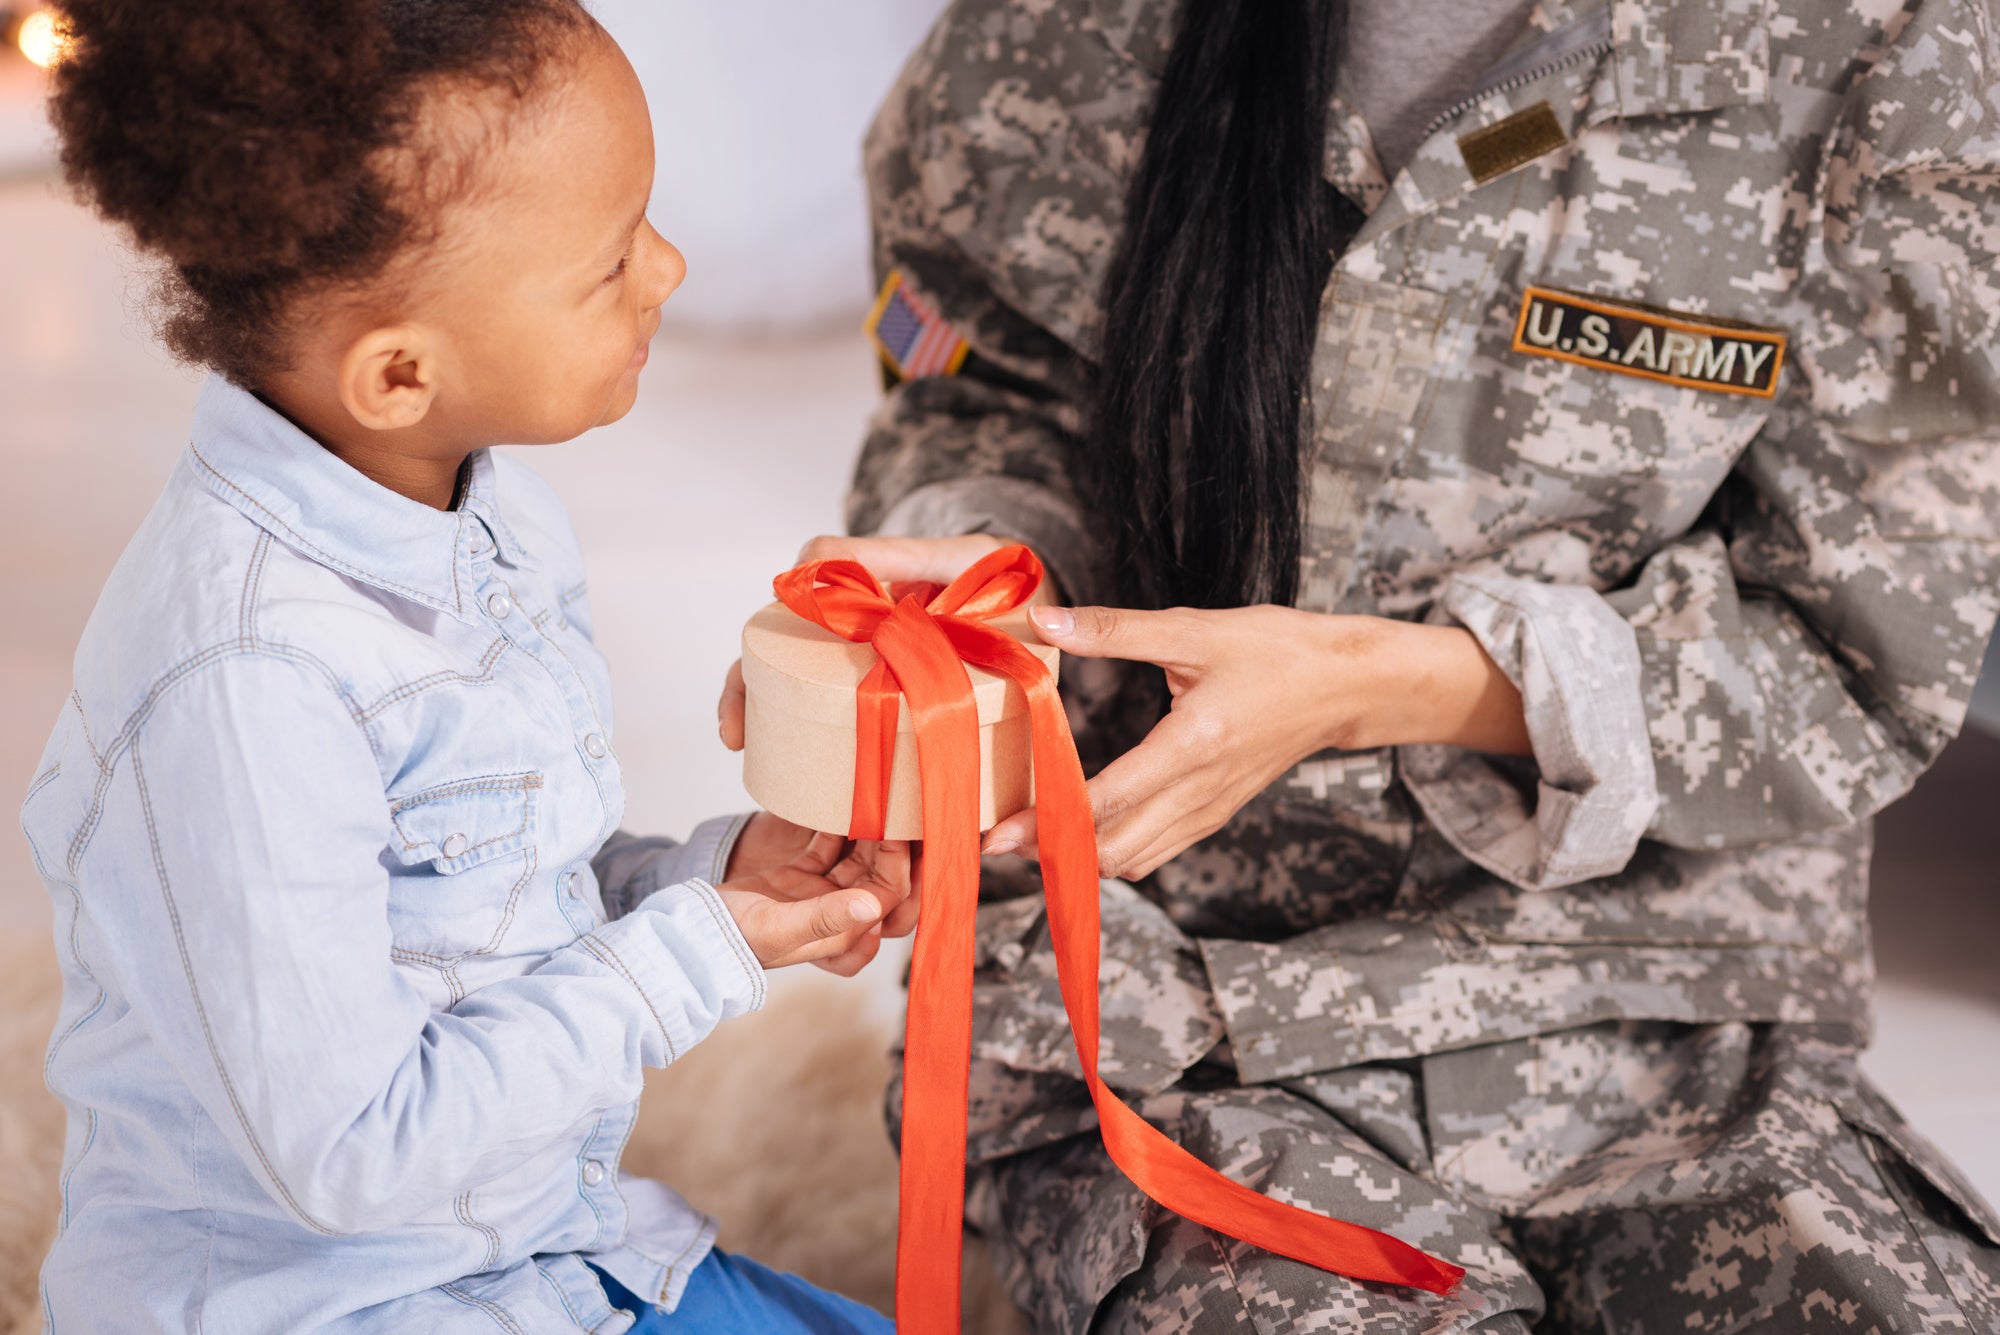 Personalized Military Gifts ➤➤➤ Gifts for Soldiers and Veterans